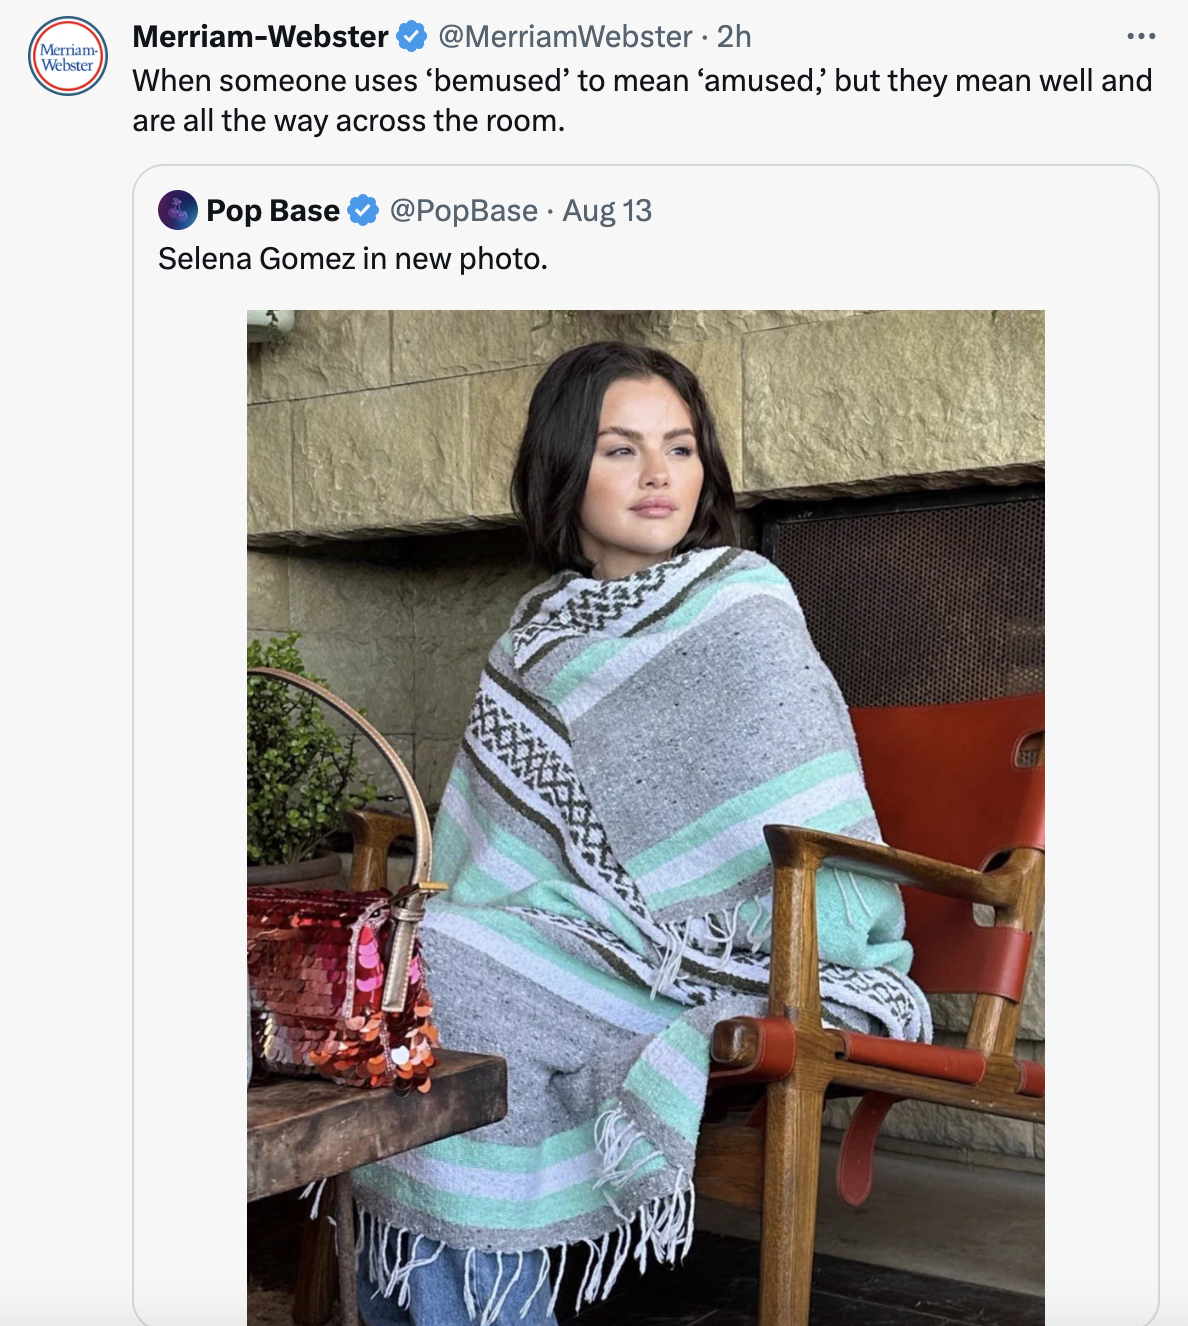 selena gomez in a blanket - stole - Meru Wel MerriamWebster 2h When someone uses 'bemused' to mean 'amused, but they mean well and are all the way across the room. Pop Base Aug 13 Selena Gomez in new photo. 77774 X